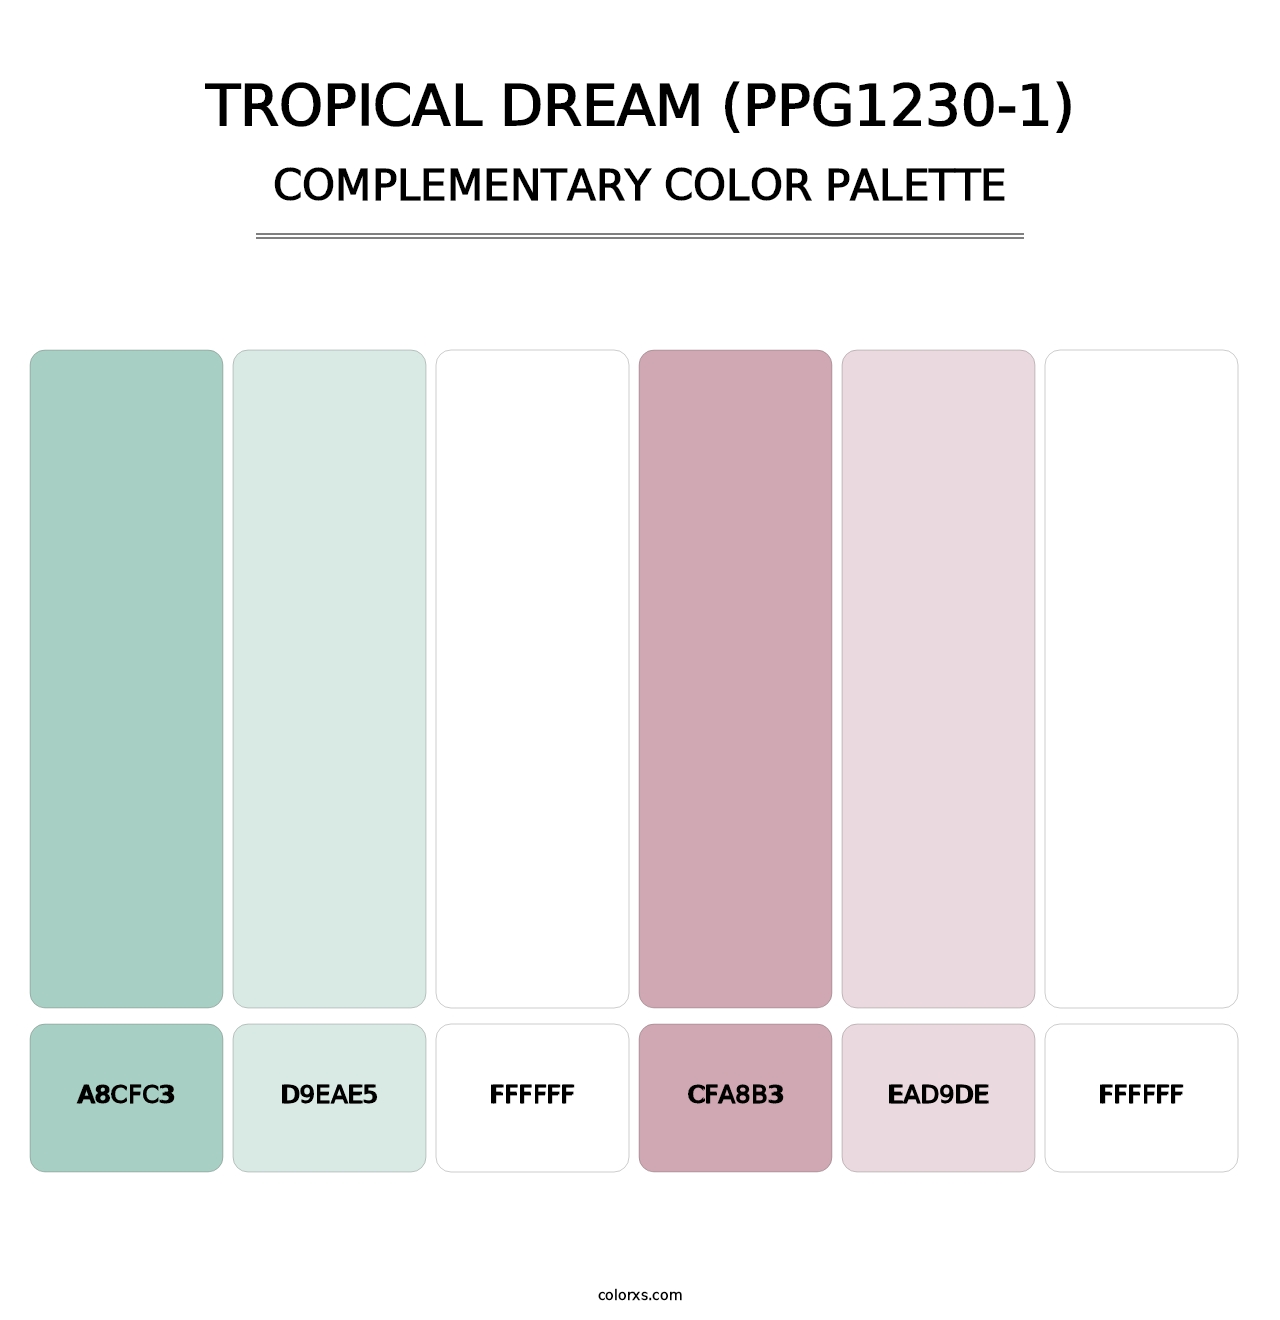 Tropical Dream (PPG1230-1) - Complementary Color Palette